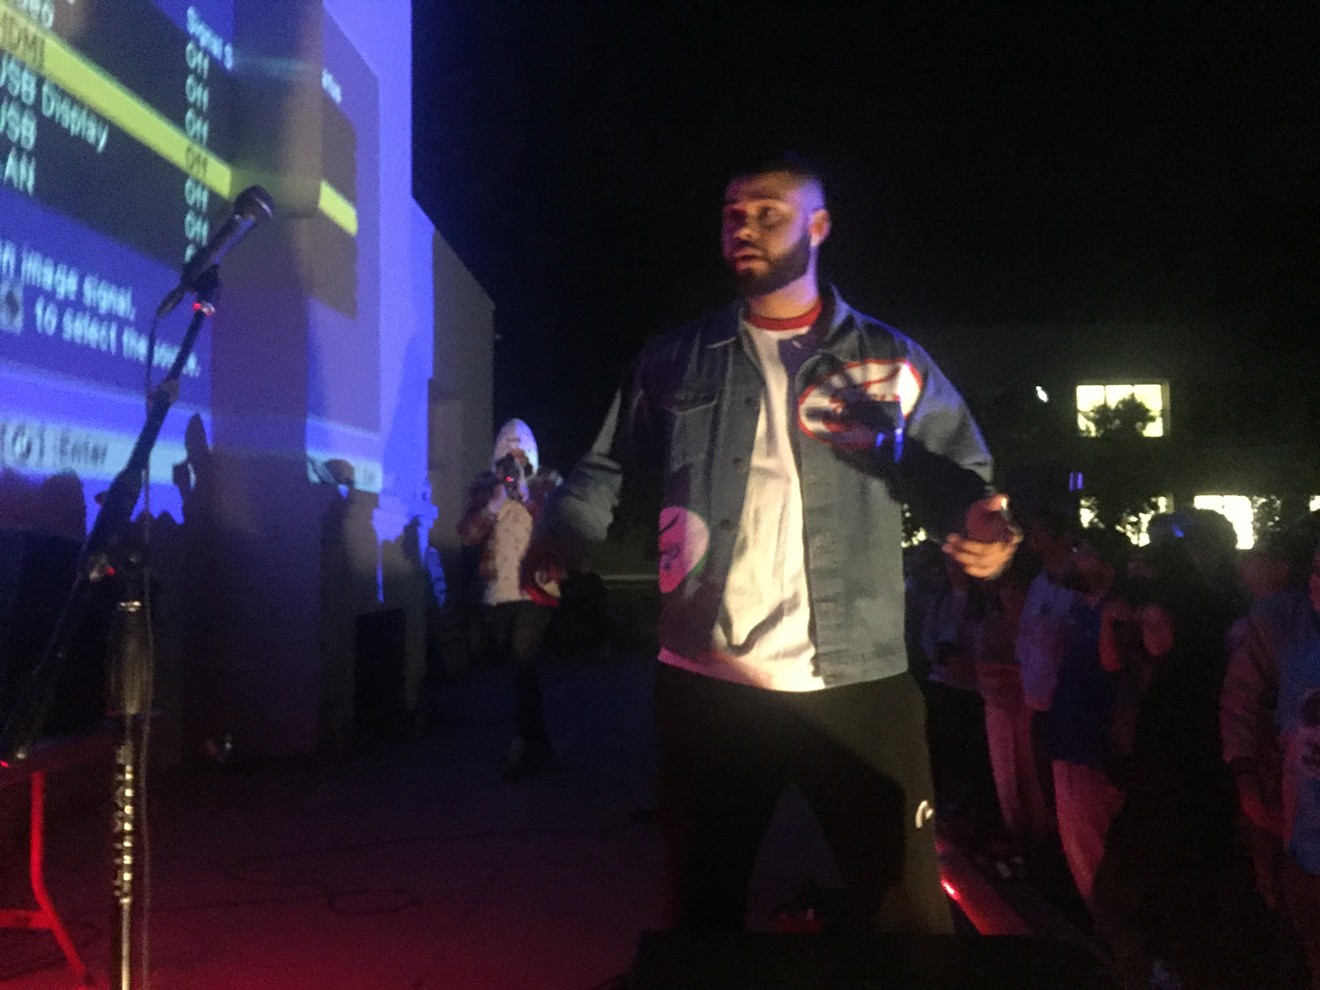 Ritchie with a T from Injury Reserve at Secretfest in Tempe.